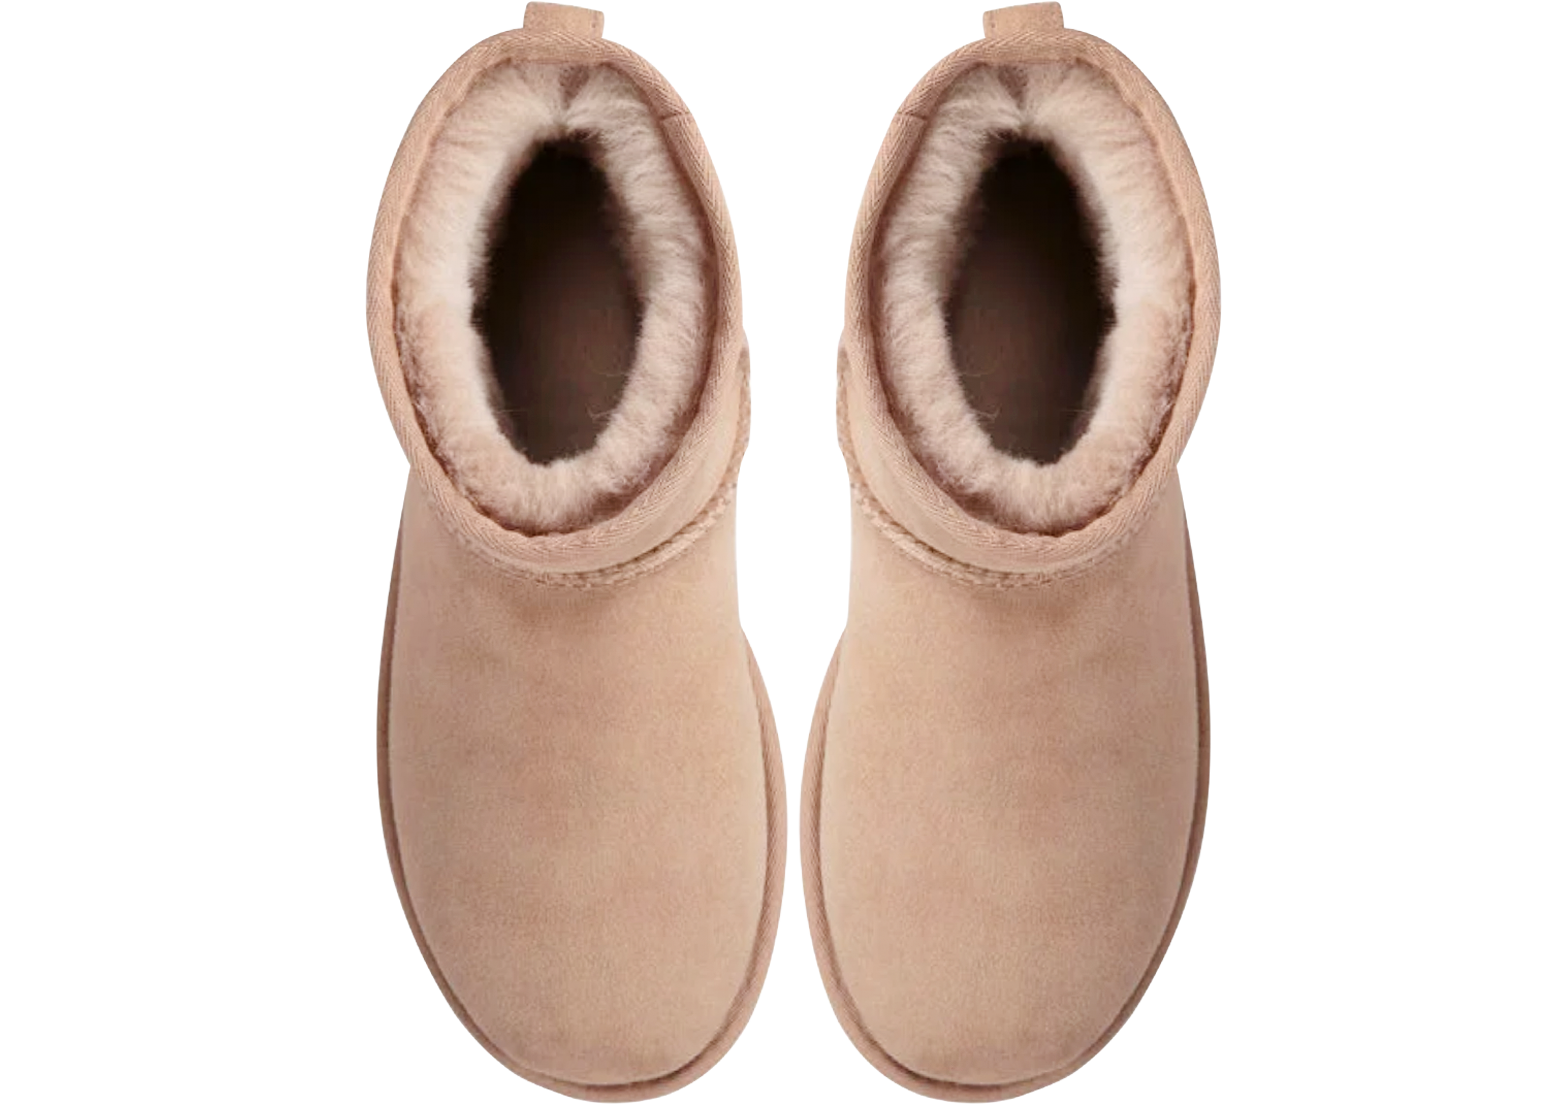 uggs fawn